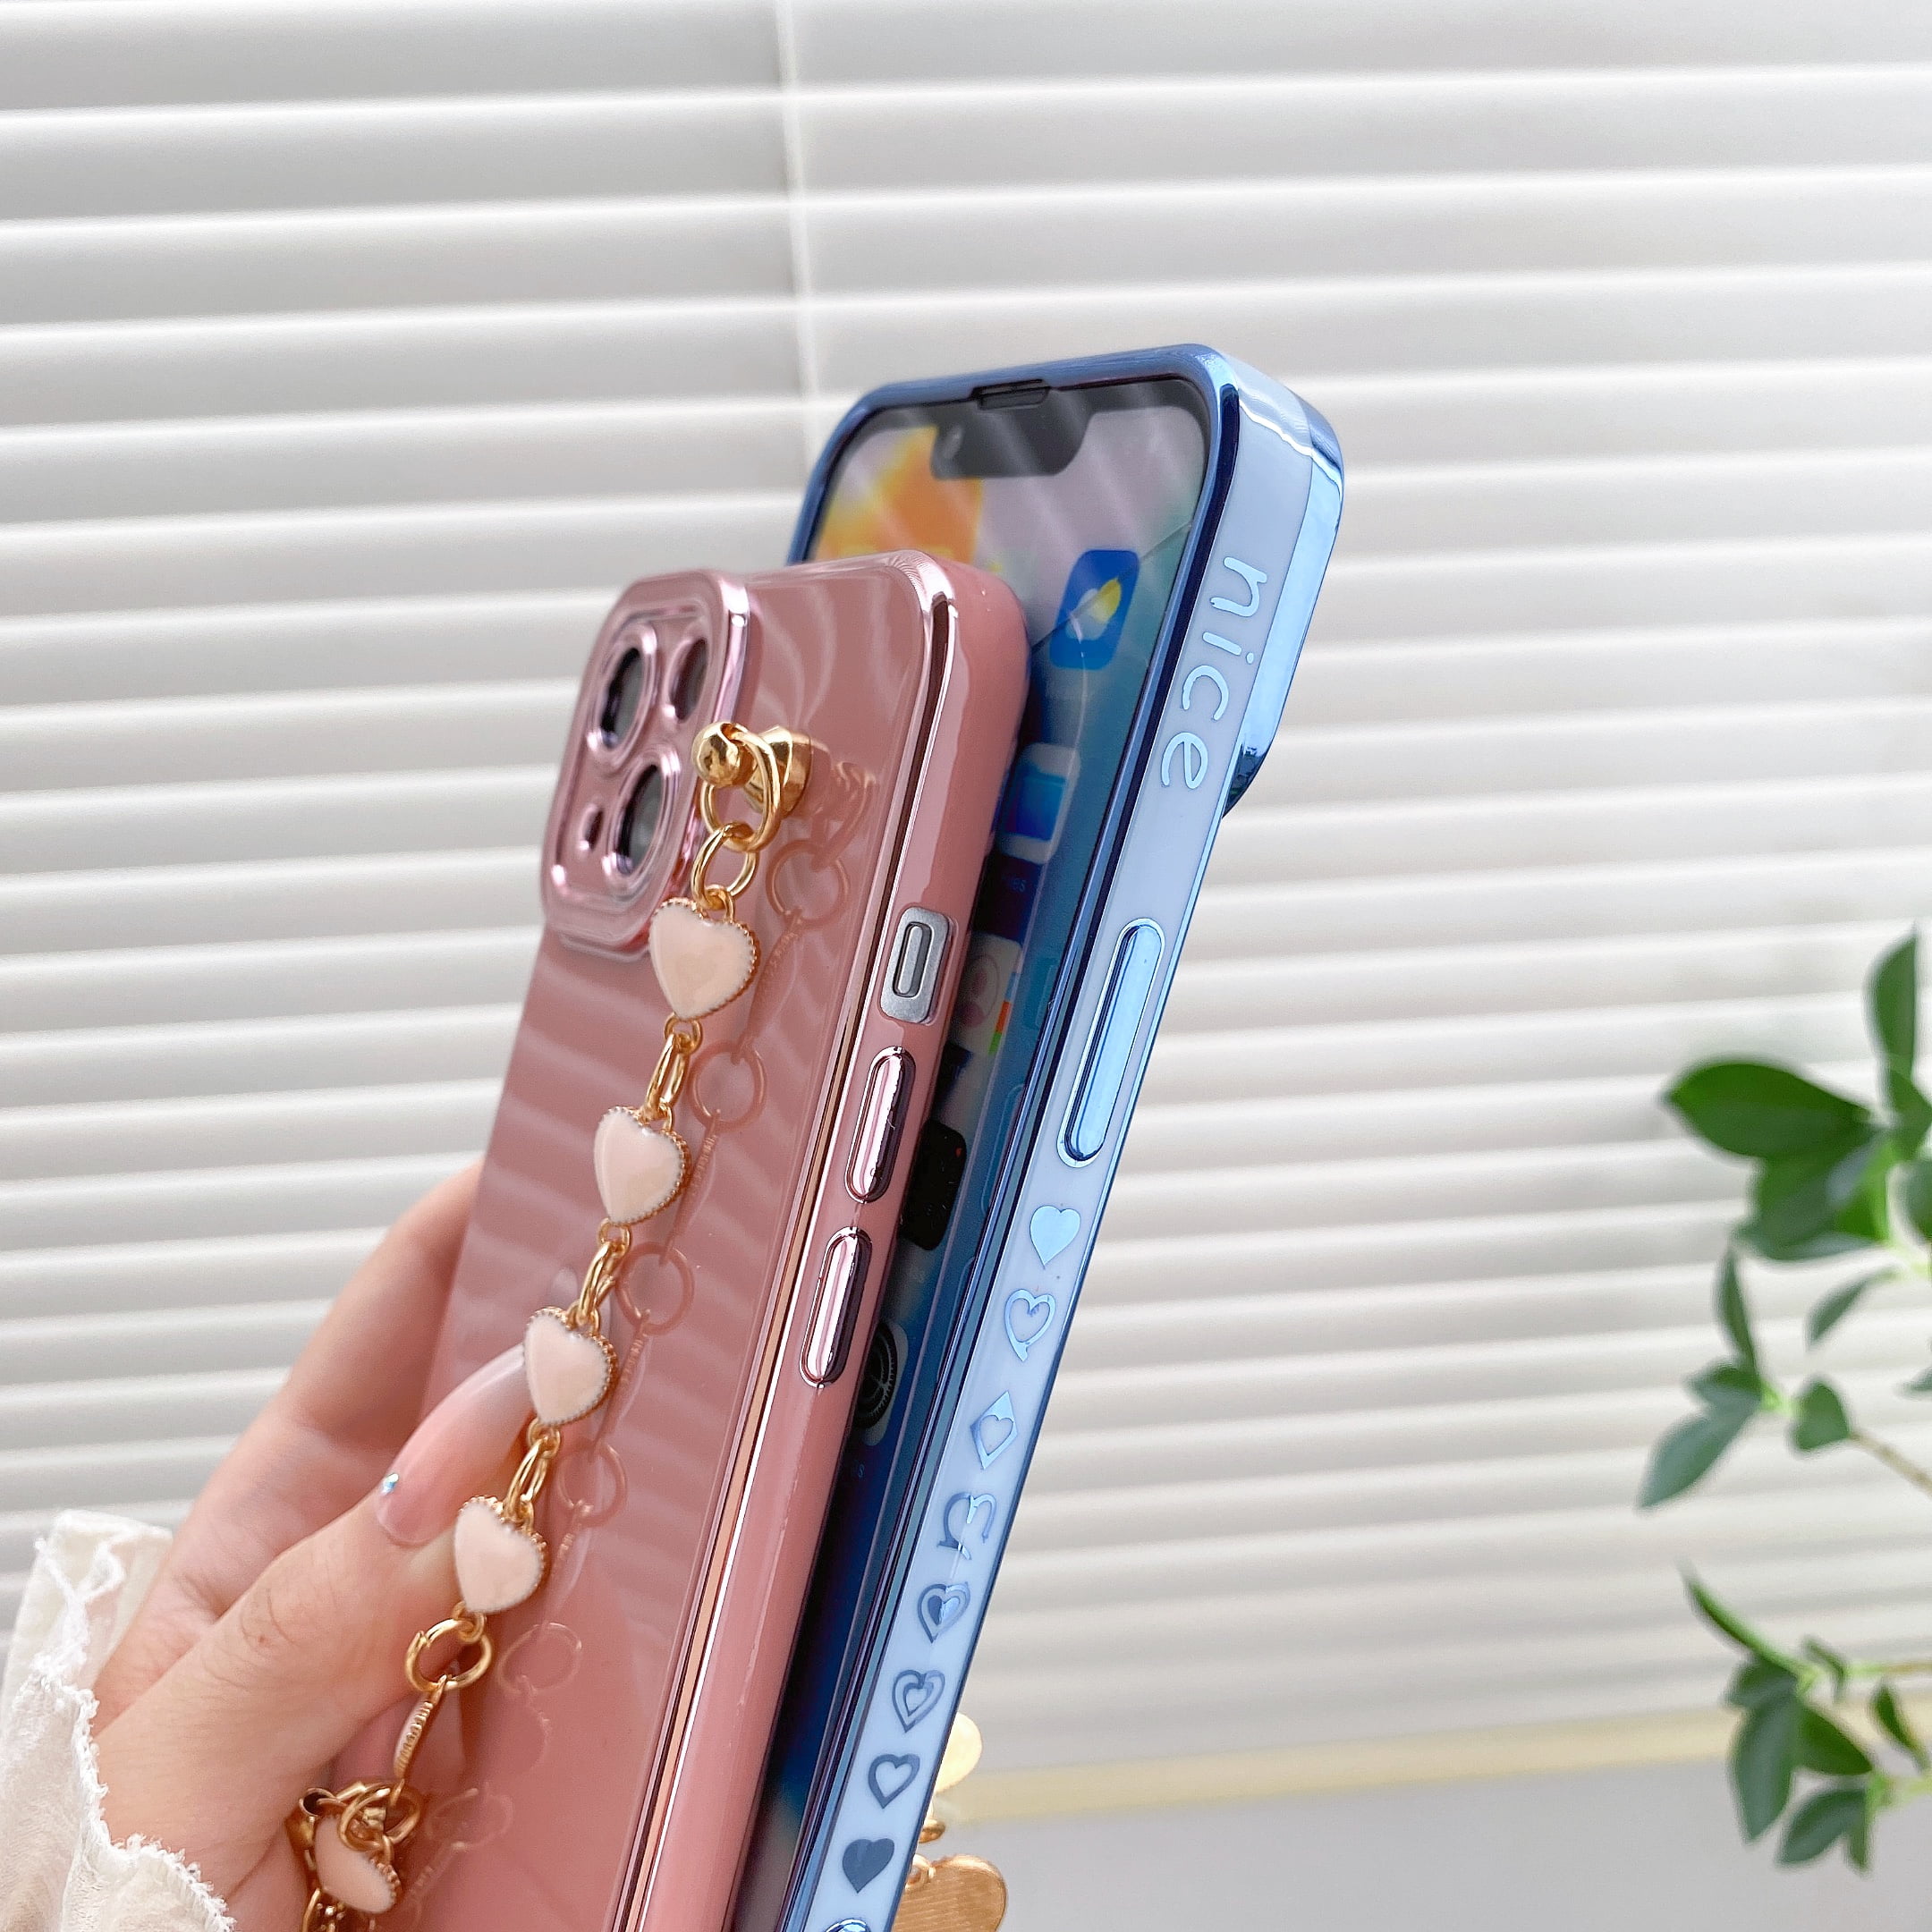  KAPUCTW for iPhone 14 Pro Max Case 6.7 Inch,Cute Gold Love  Heart Cases Cover with Anti-Fall Cameras Protection Soft TPU Bumper  Silicone Shockproof Anti-Fingerprint Phone Cases for Girls Women,Blue : Cell